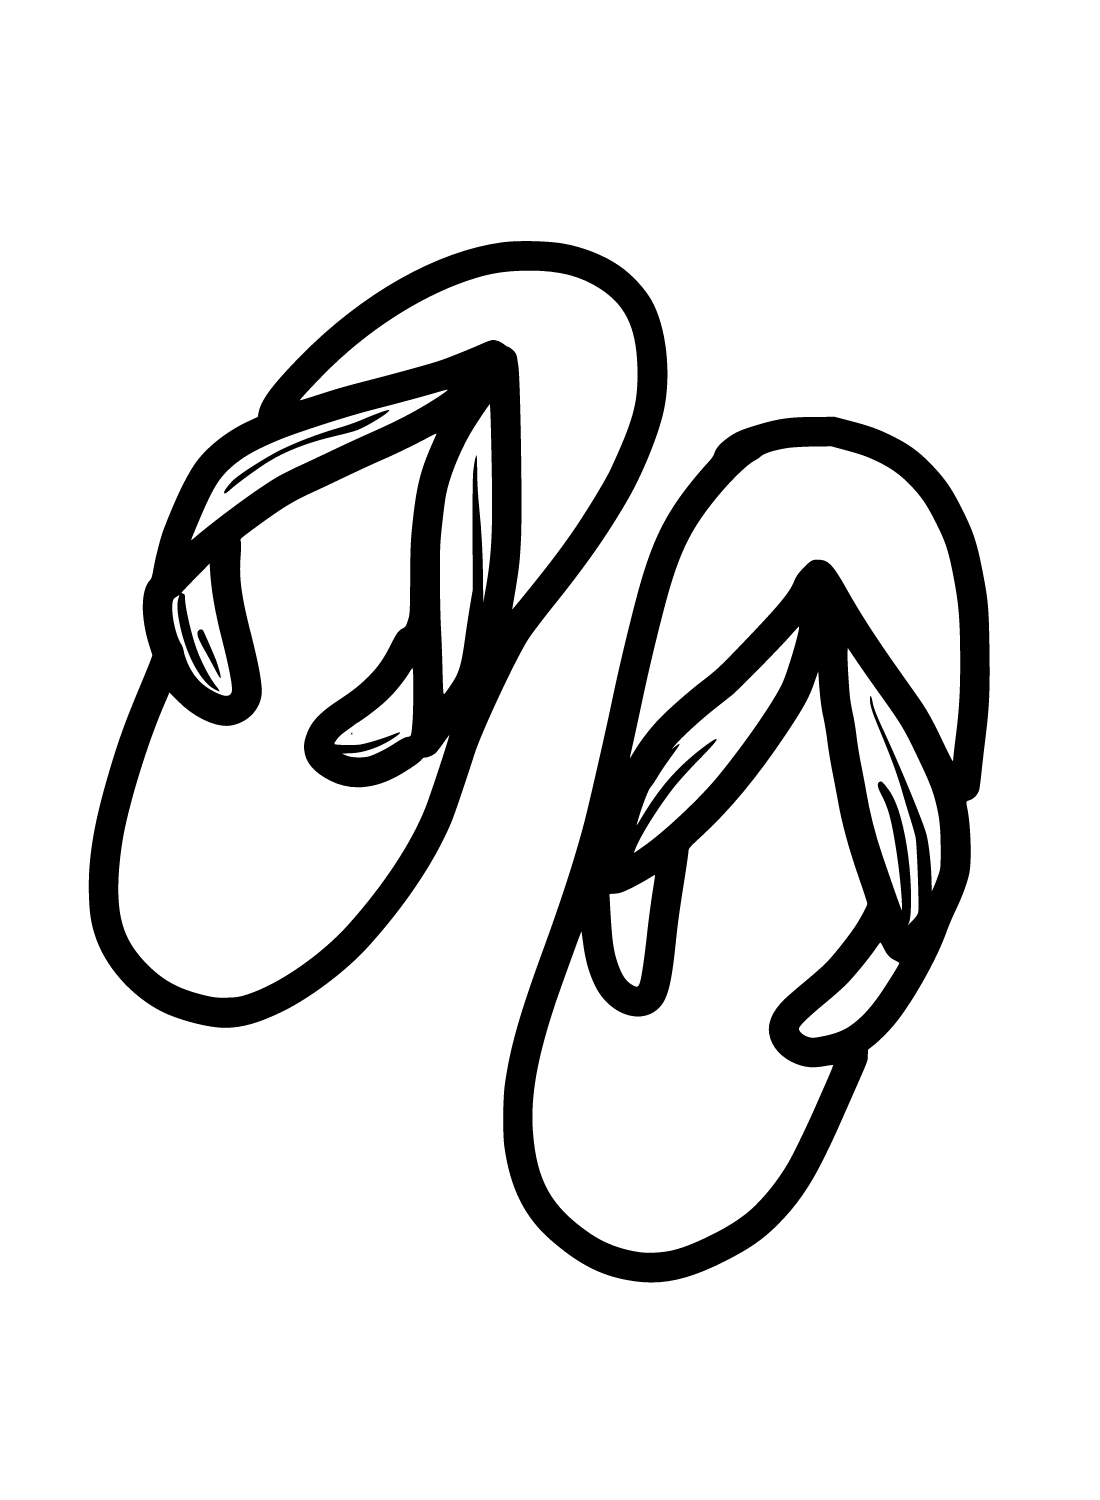 Sandal Slippers Coloring Page